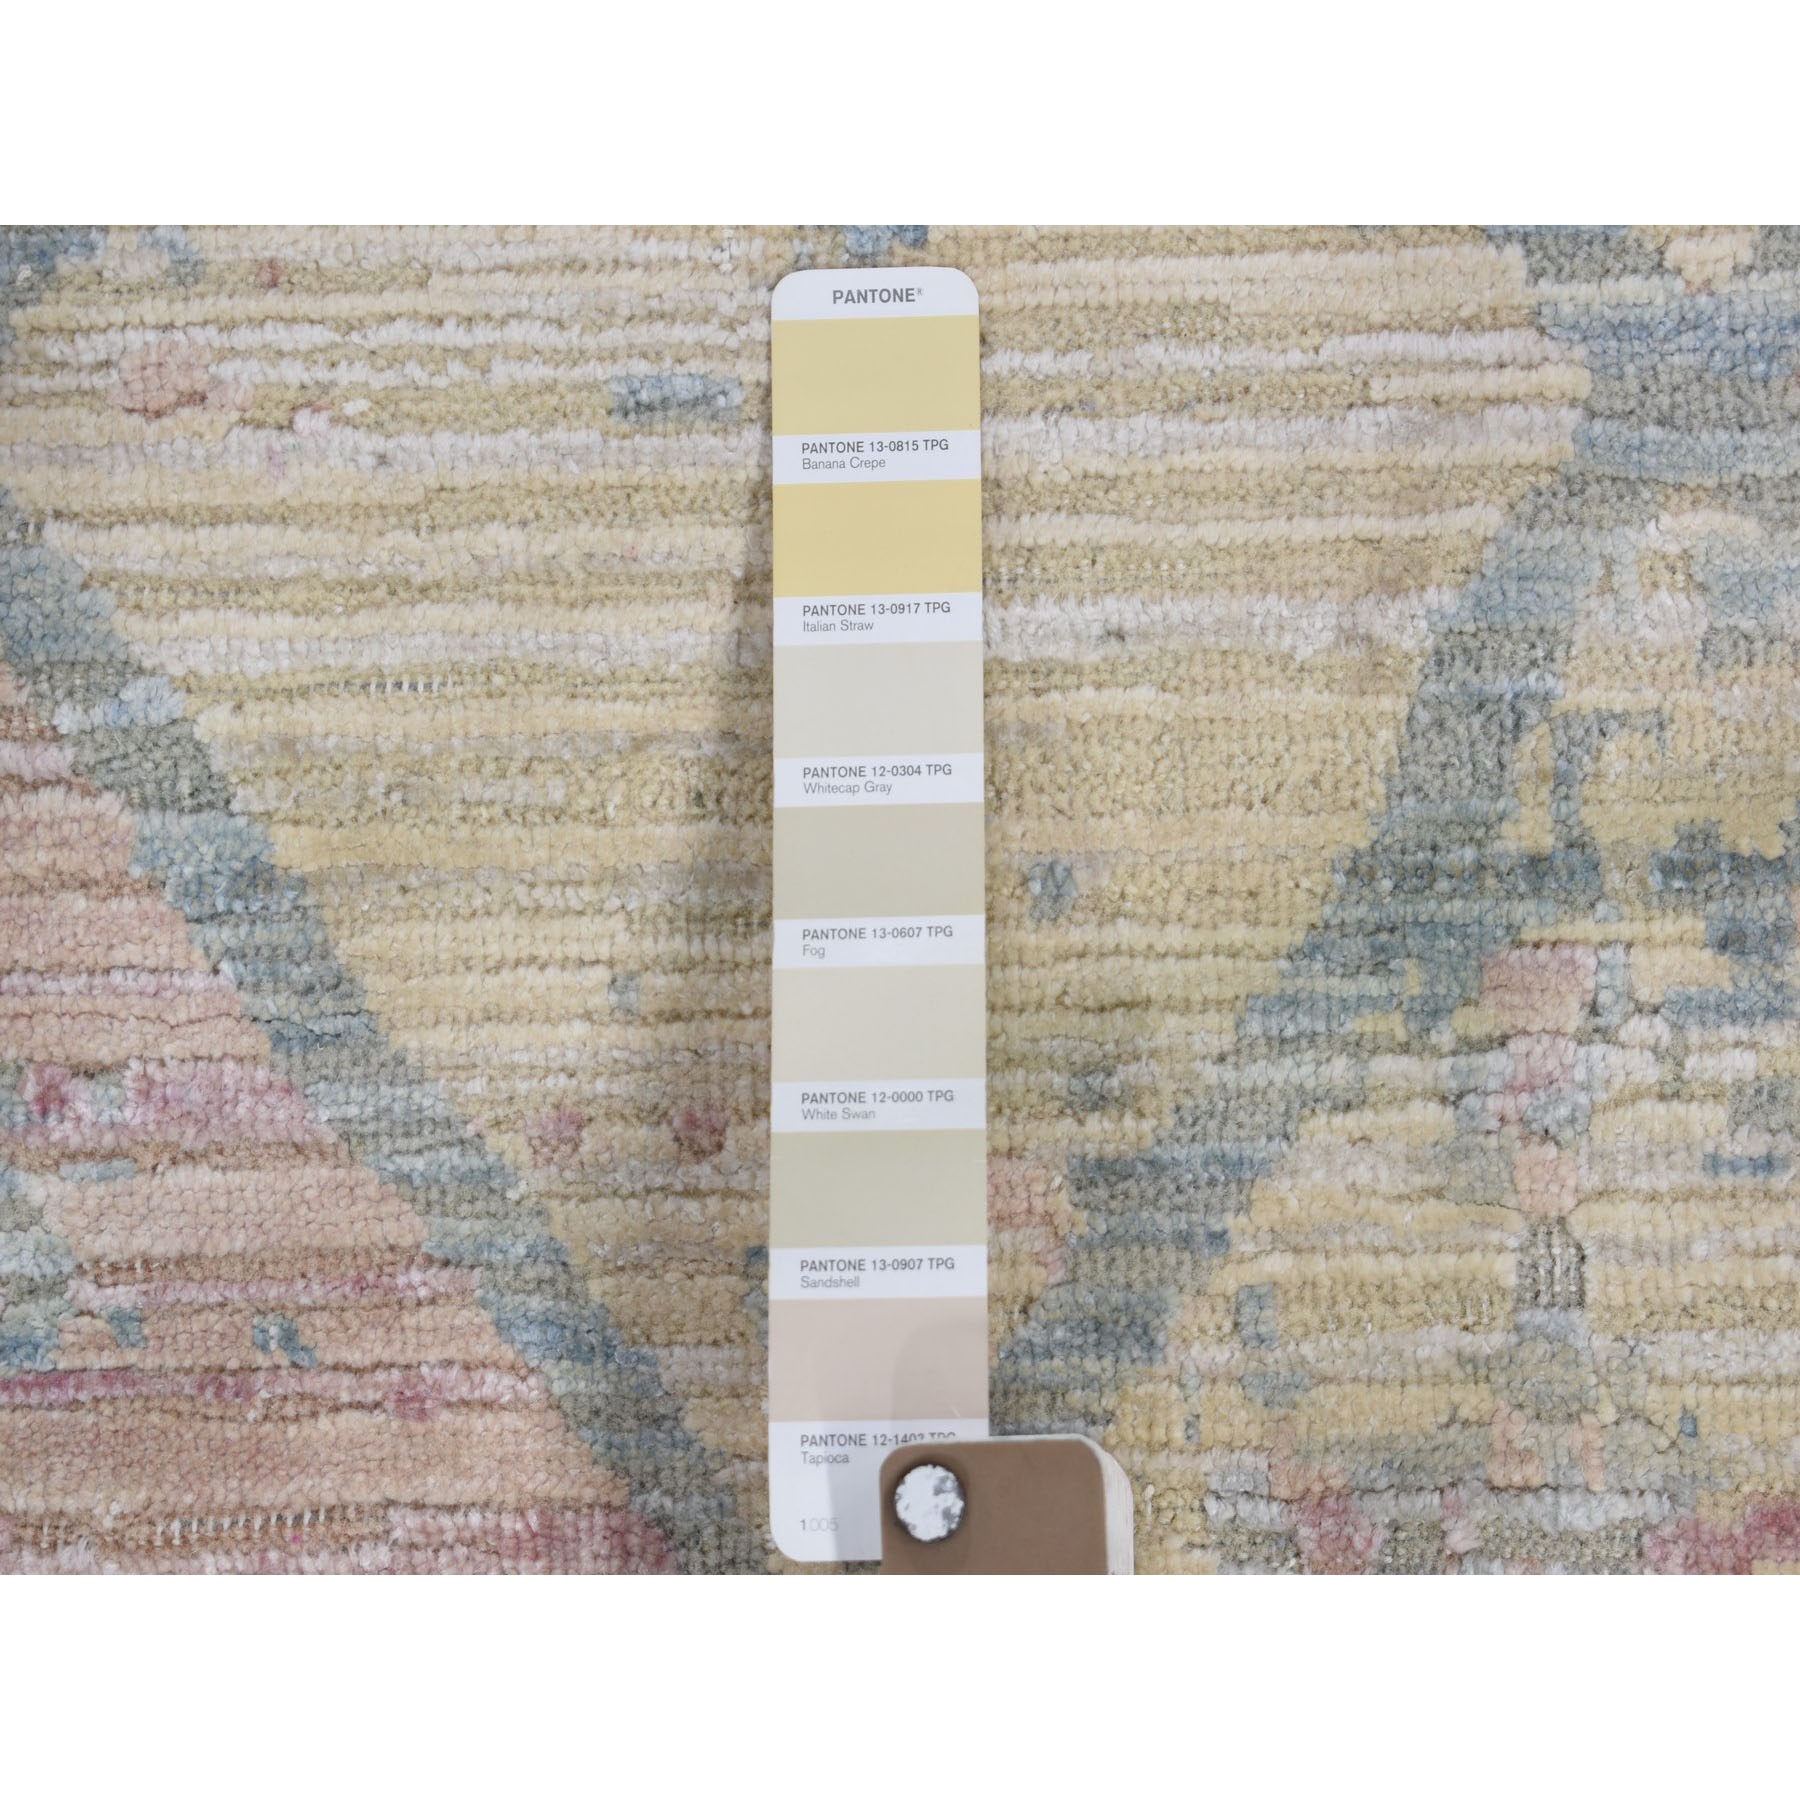 9-x11-10  Pastel Colors Textured Wool And Pure Silk Genuine Hand Knotted Oriental Rug 